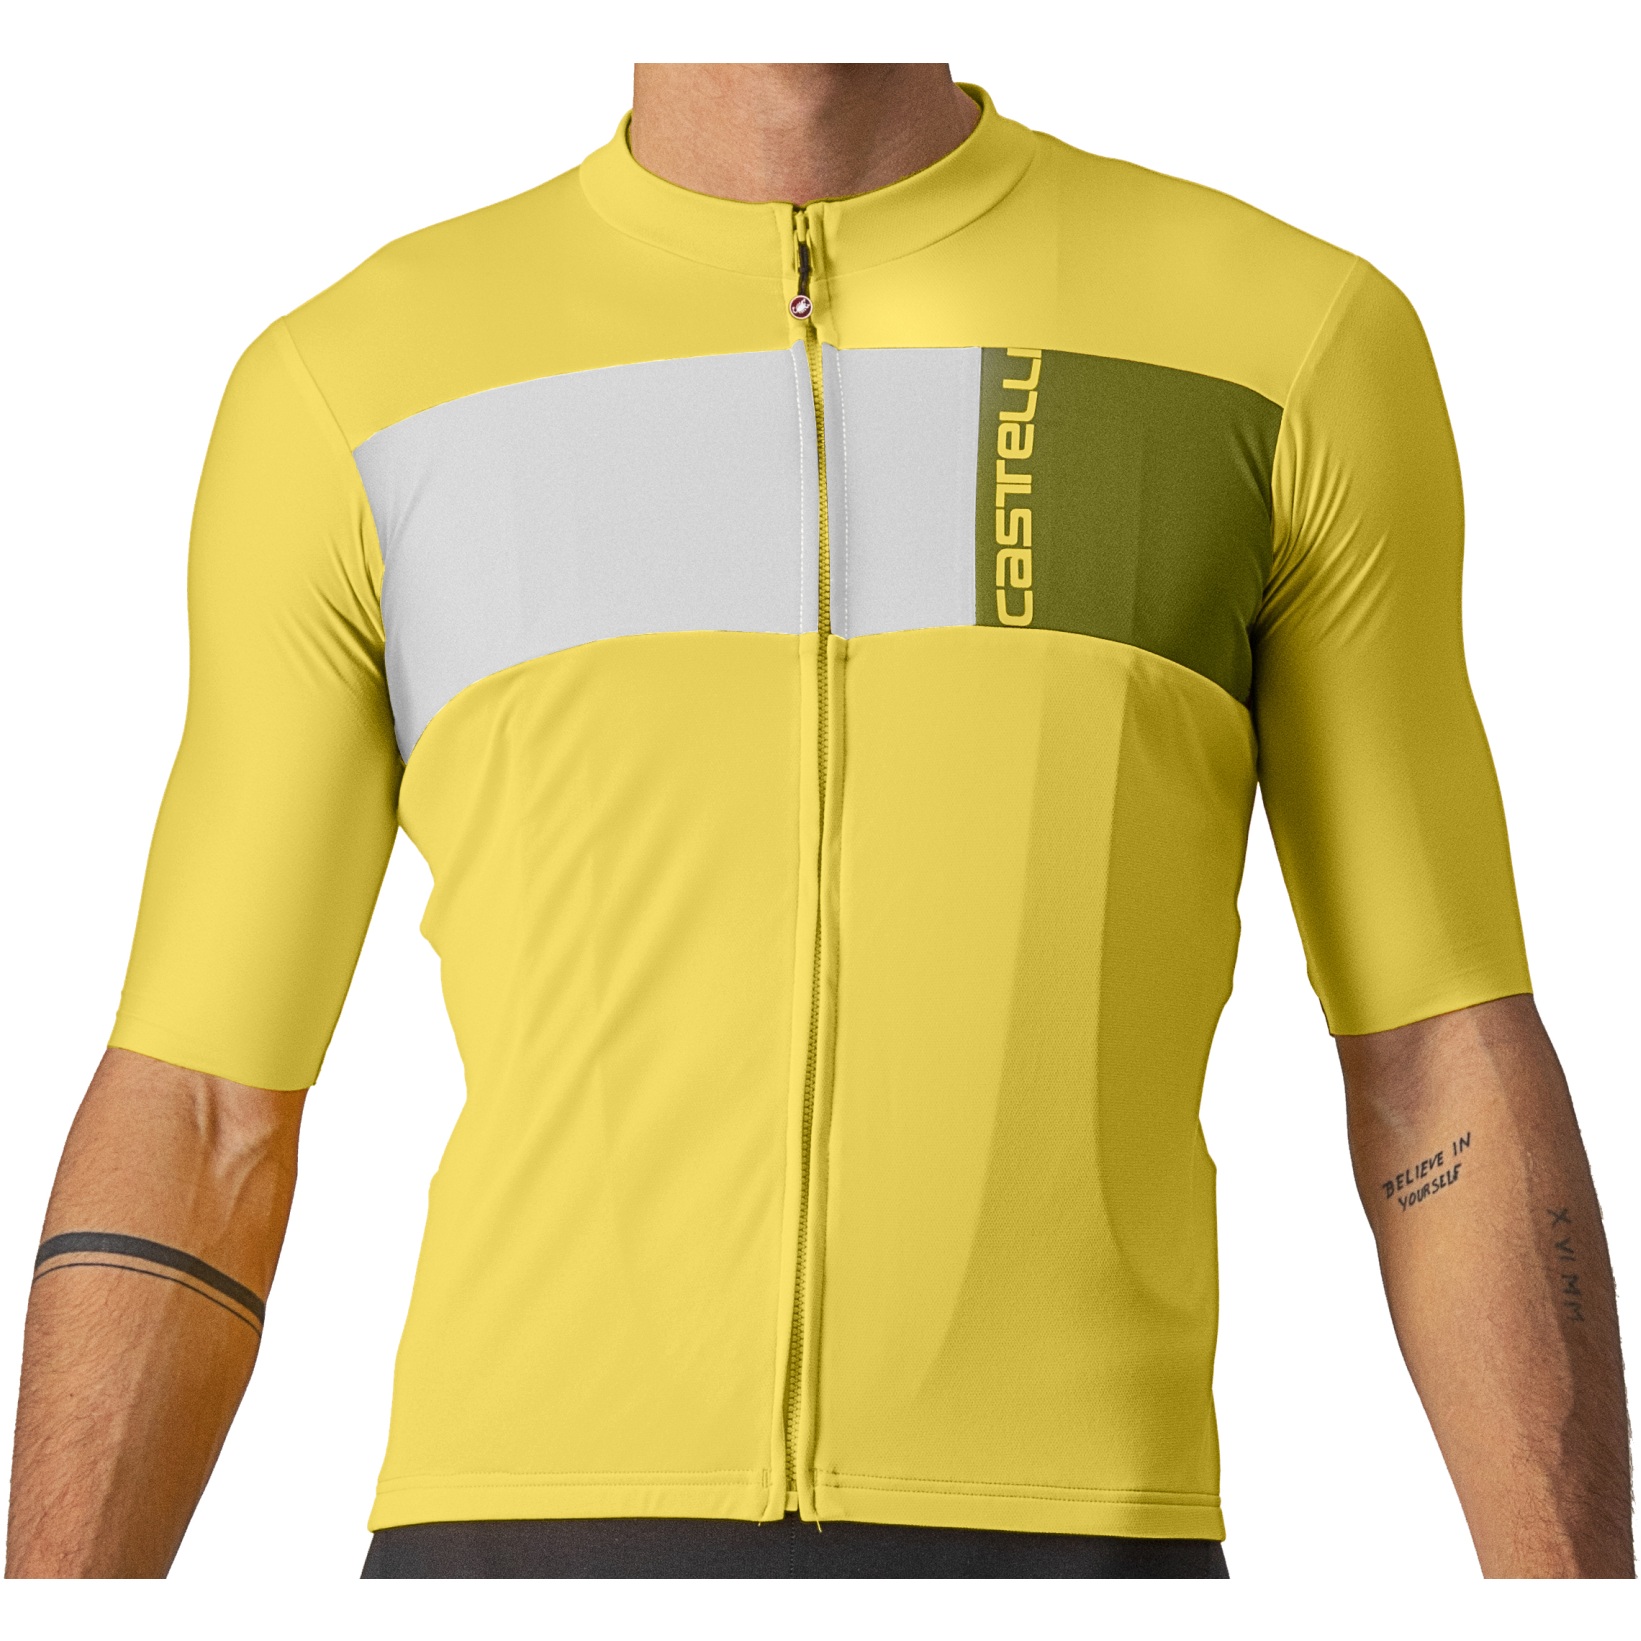 Picture of Castelli Prologo 7 Jersey Men - passion fruit/ivory-avocado green 782